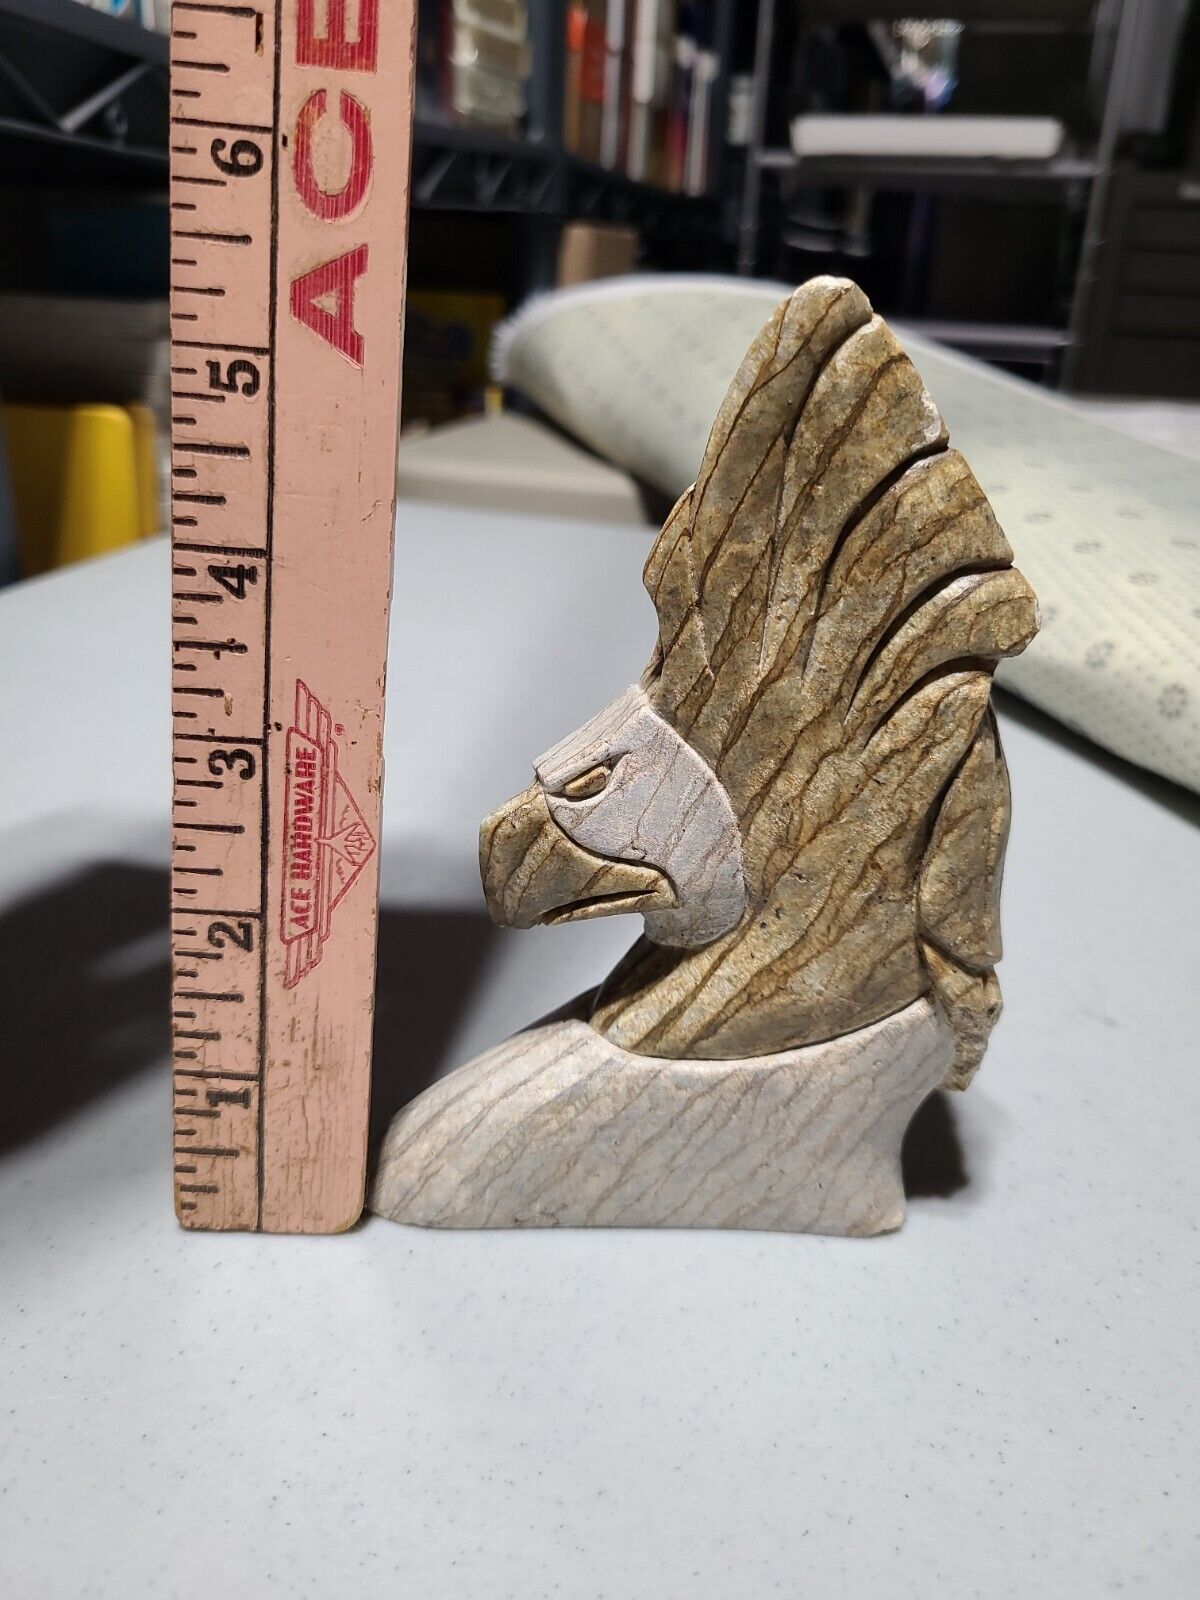 Tiger Stone Carved Bald Eagle Paperweight Christine Thomas 1991 Native American